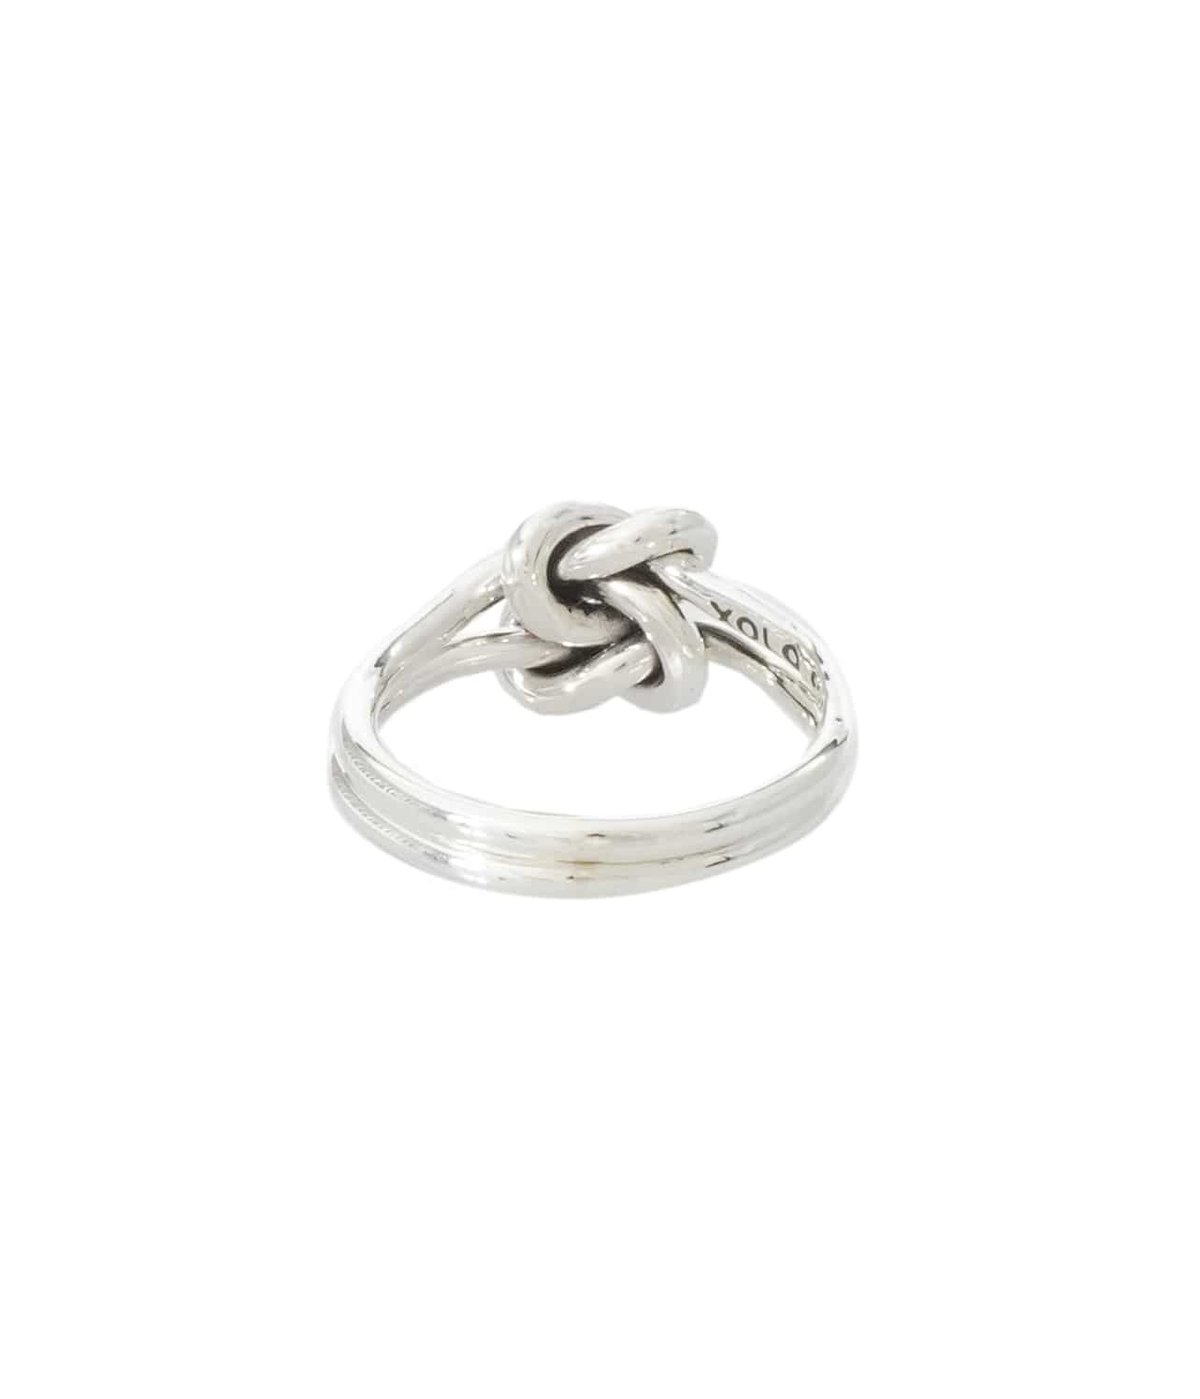 Double Knot Ring Small XOLO JEWELRY(ショロ ジュエリー) アクセサリー リング (メンズ)の通販  ARKnets(アークネッツ) 公式通販 【正規取扱店】